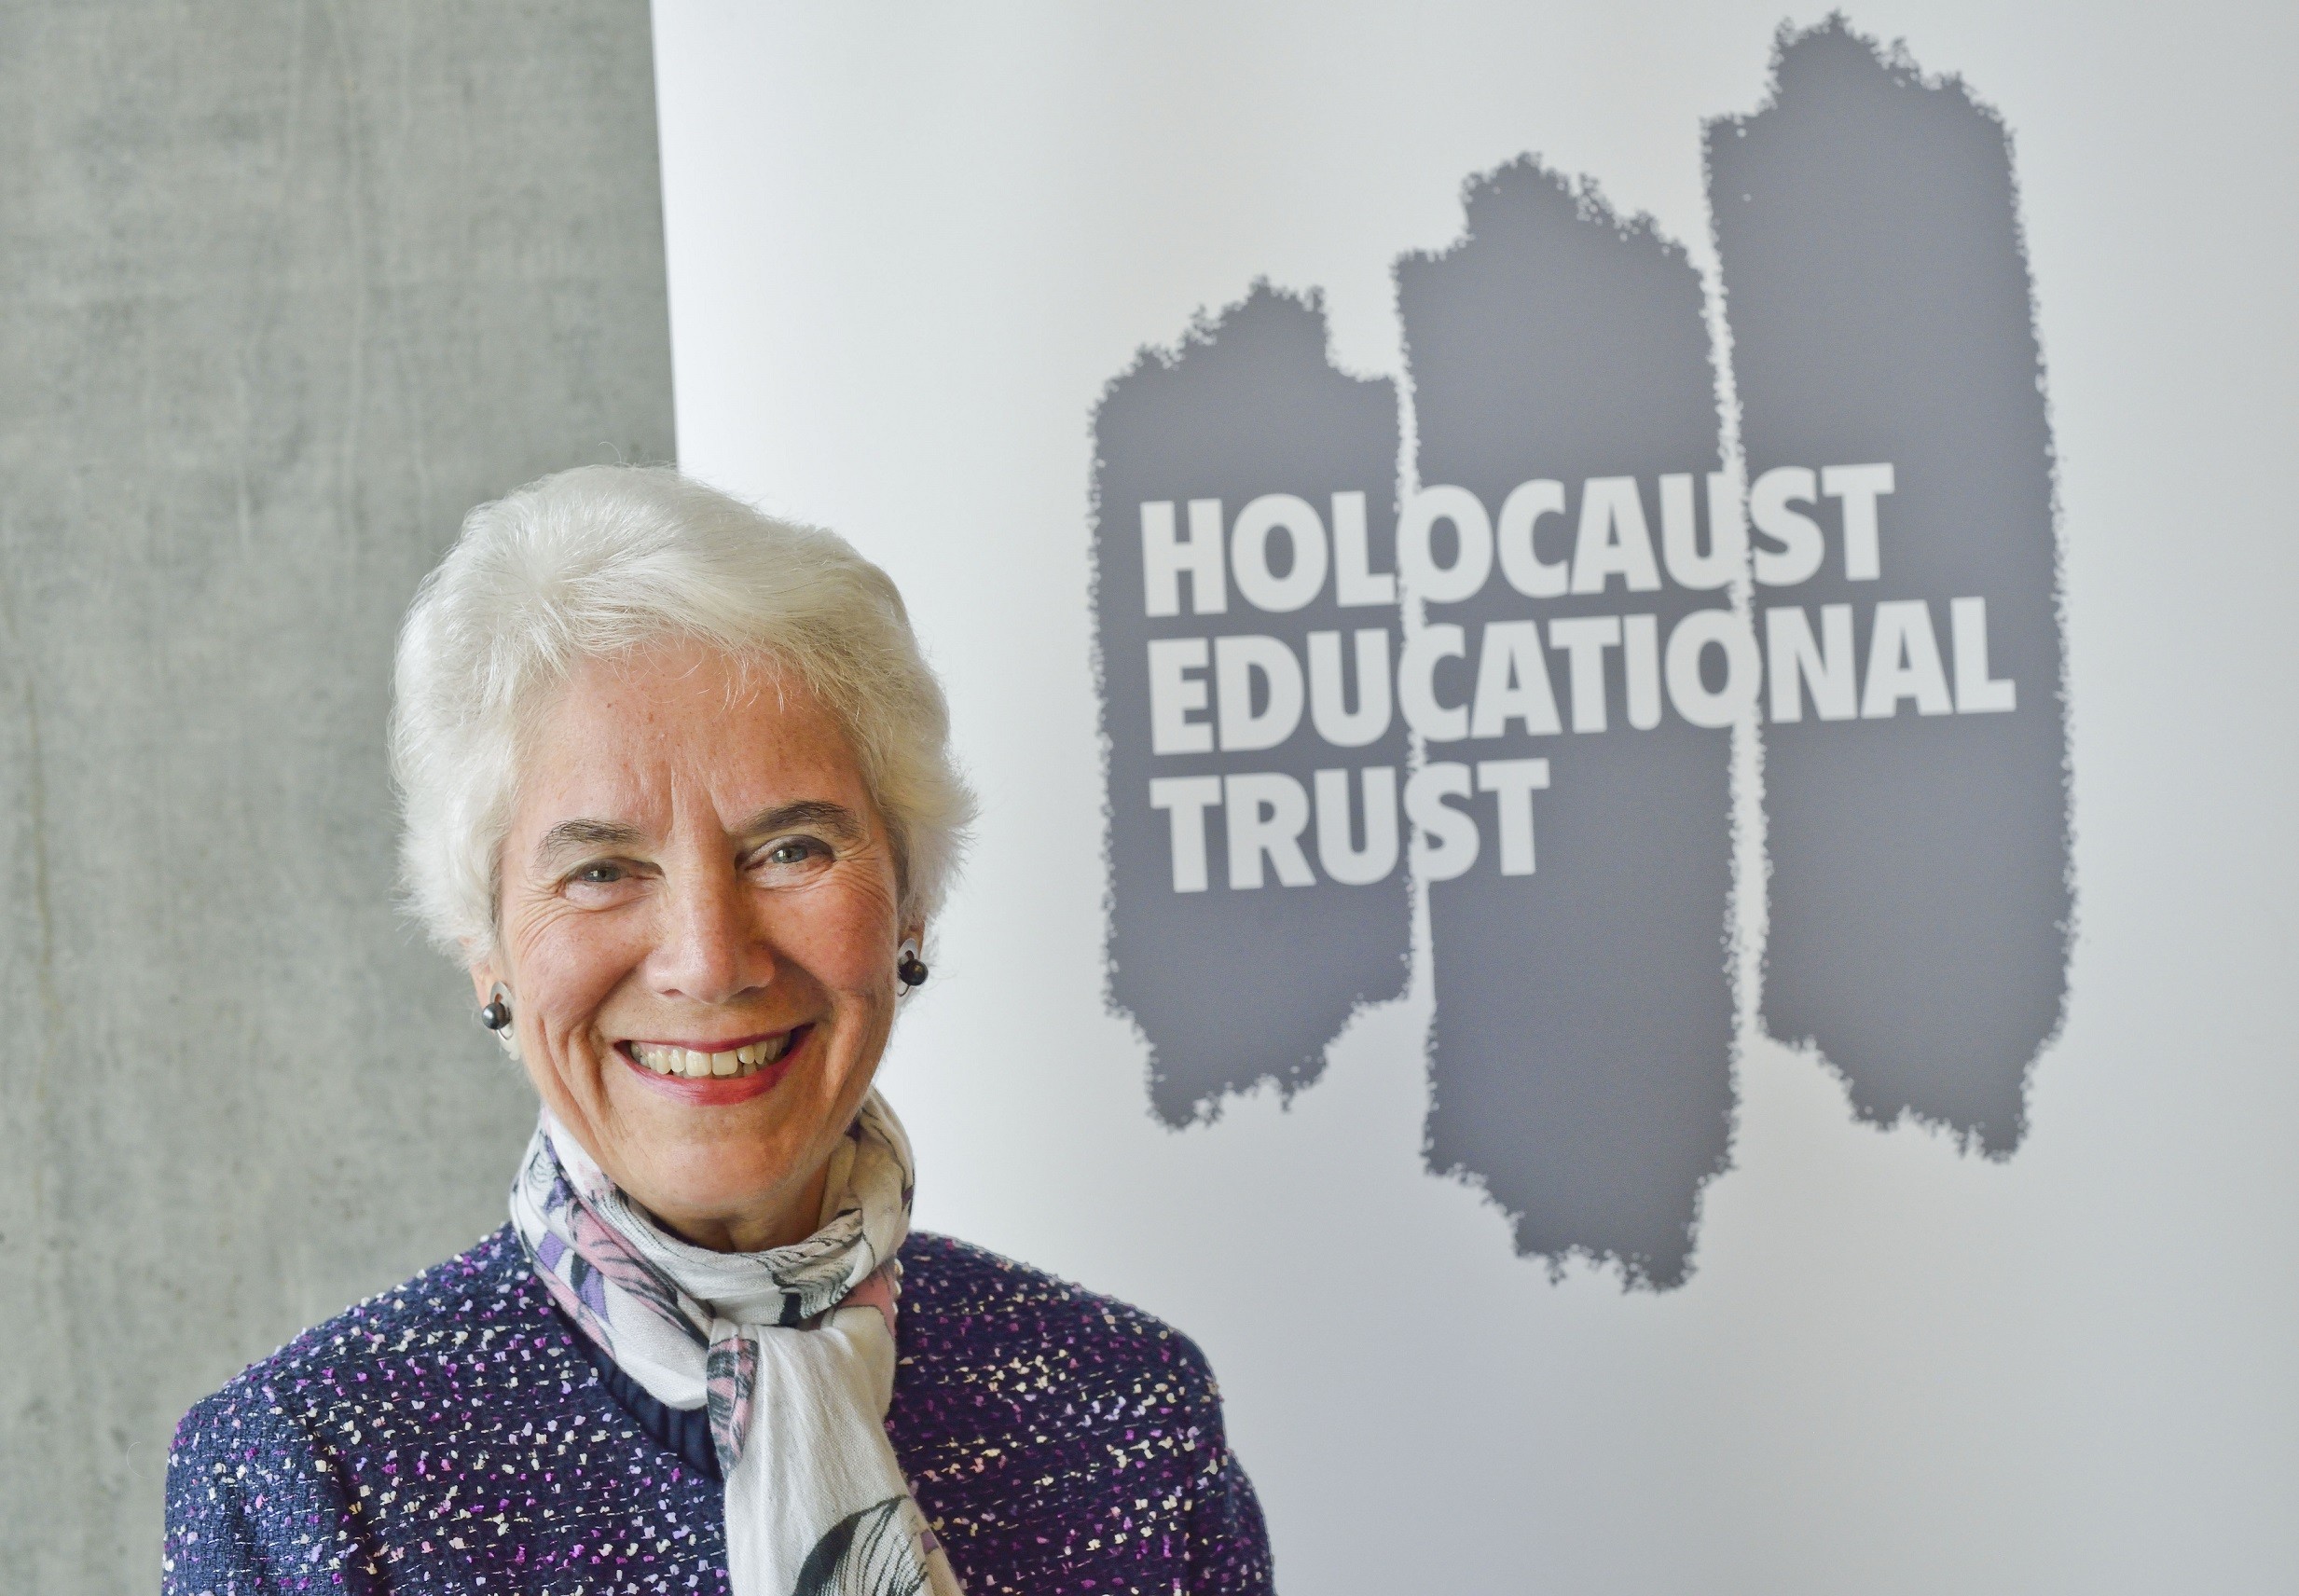 Holocaust Survivor Will Tell of Experiences at Memorial Event